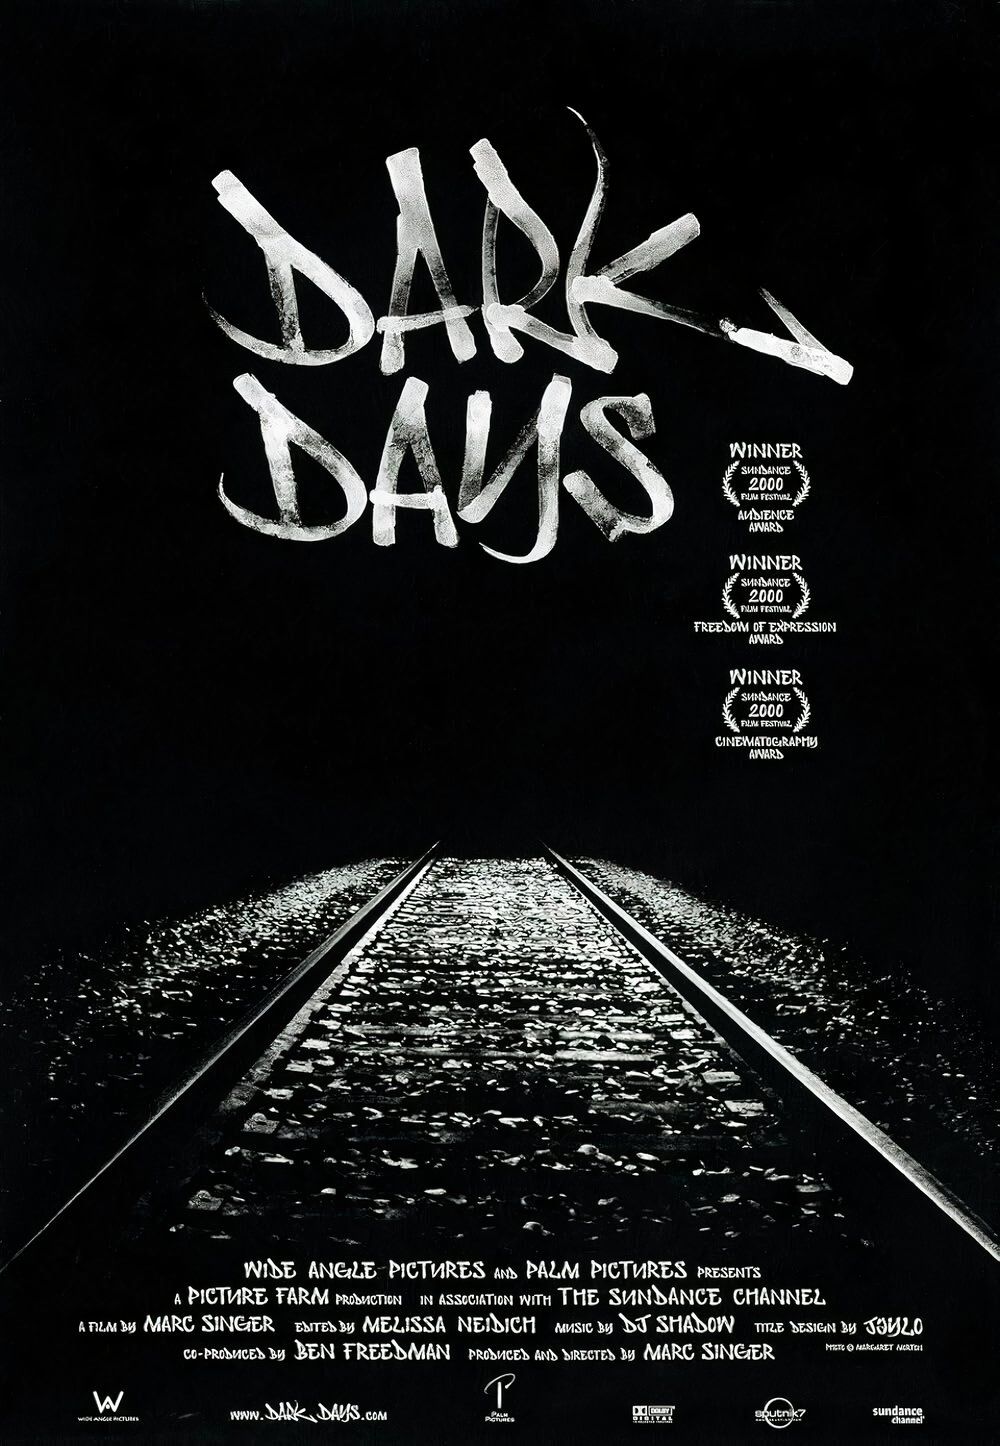 The official poster for Dark Days